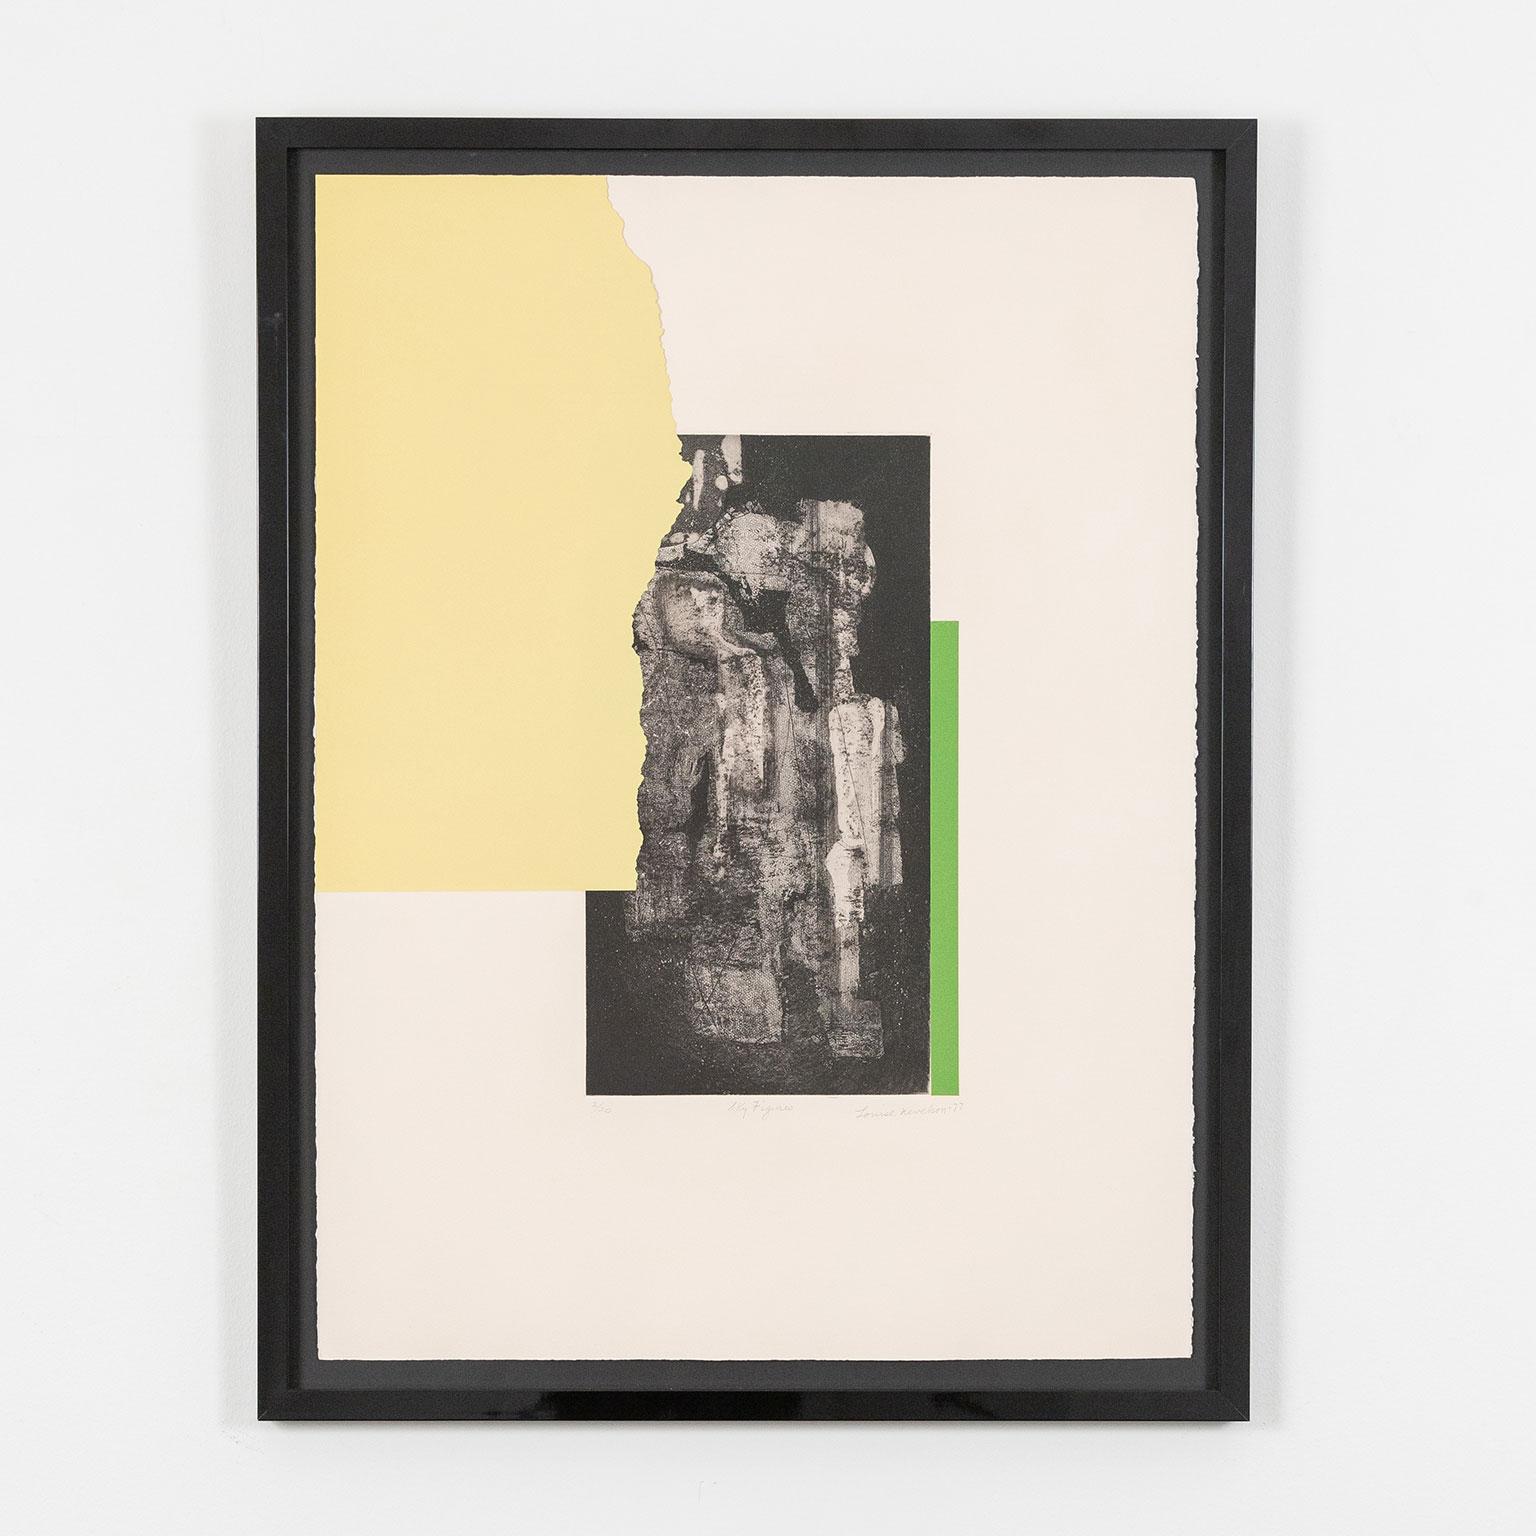 Caviar20 is excited to be offering this evocative print by the inimitable Louise Nevelson - one of the most revered and unique sculptors of the 20th century.

Nevelson is renowned for her mysterious and complex sculptures. She was also an active